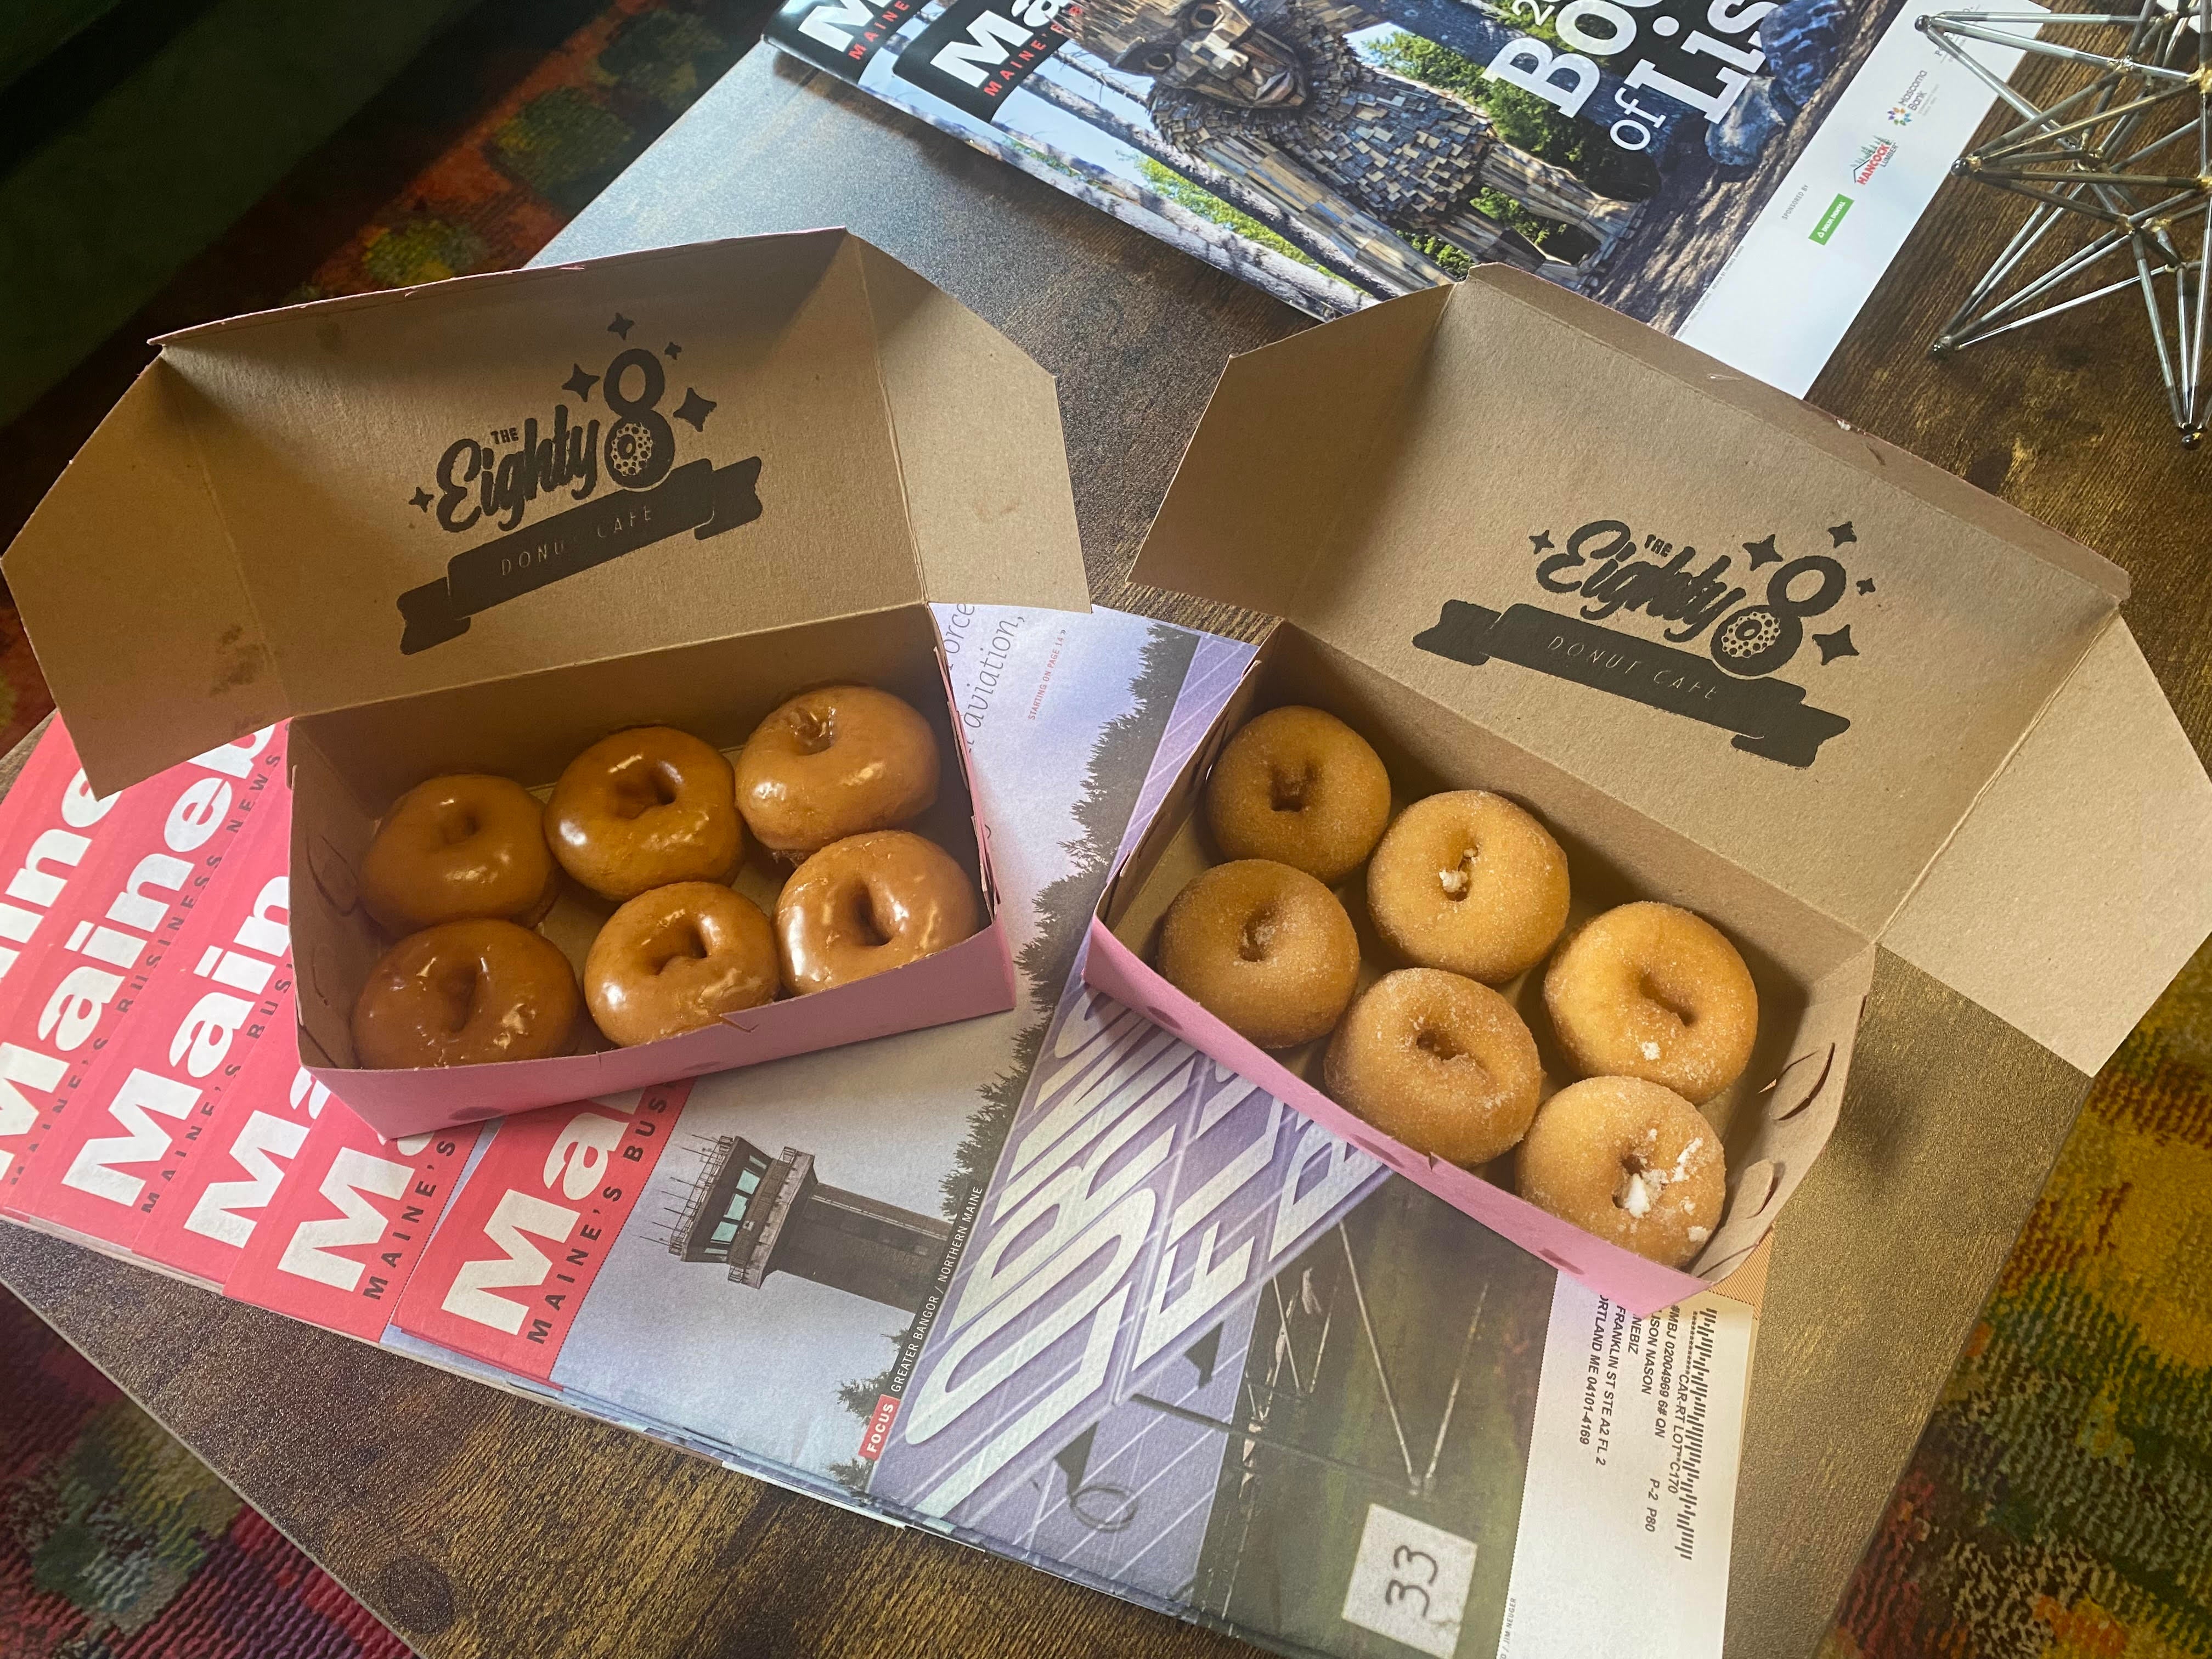 Donut and Go - Donut and Coffee Trail